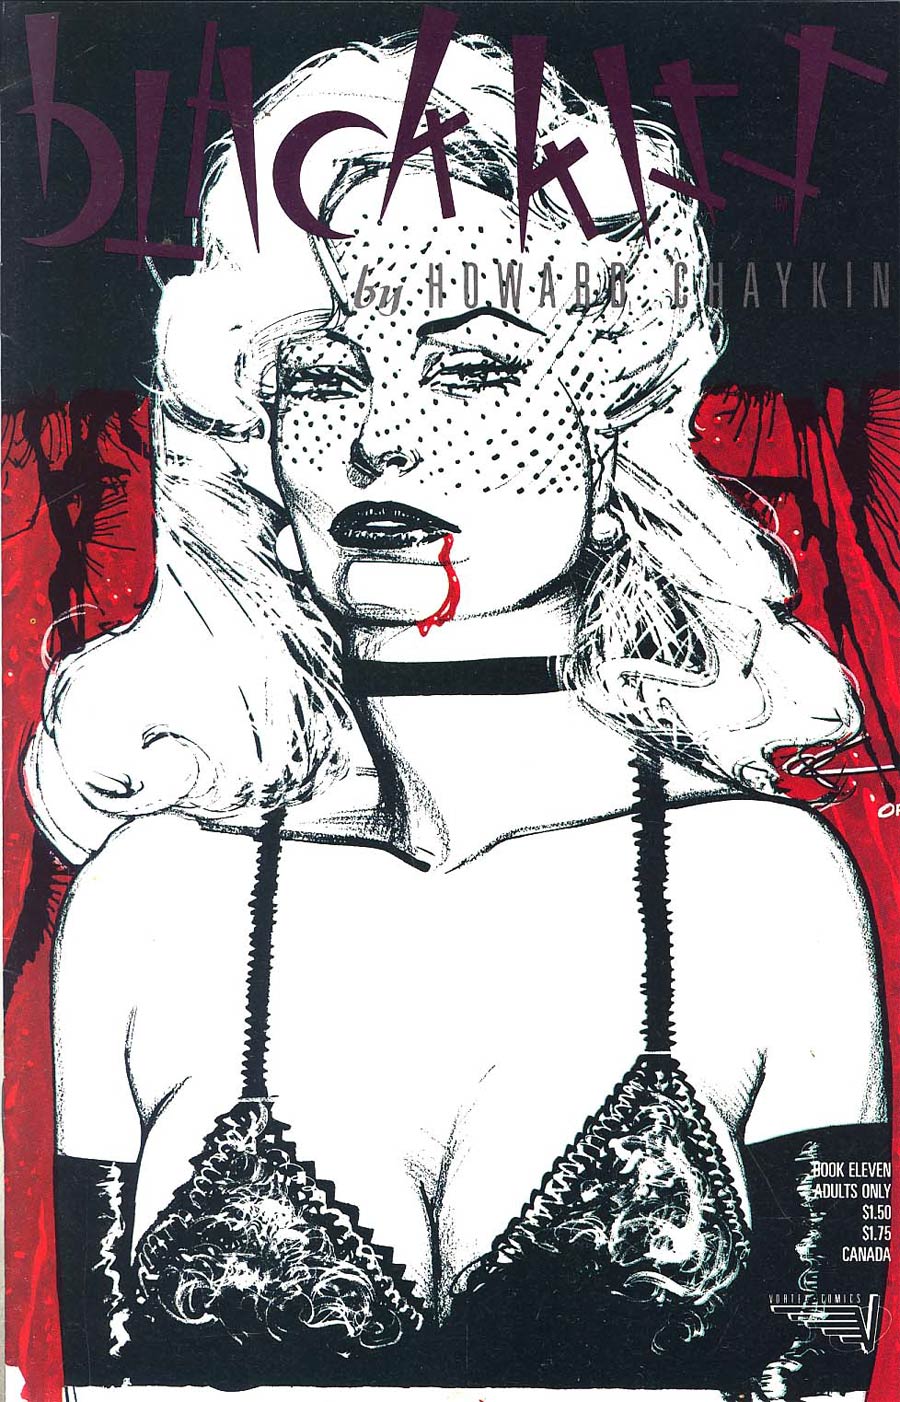 Black Kiss #11 Cover B Without Polybag